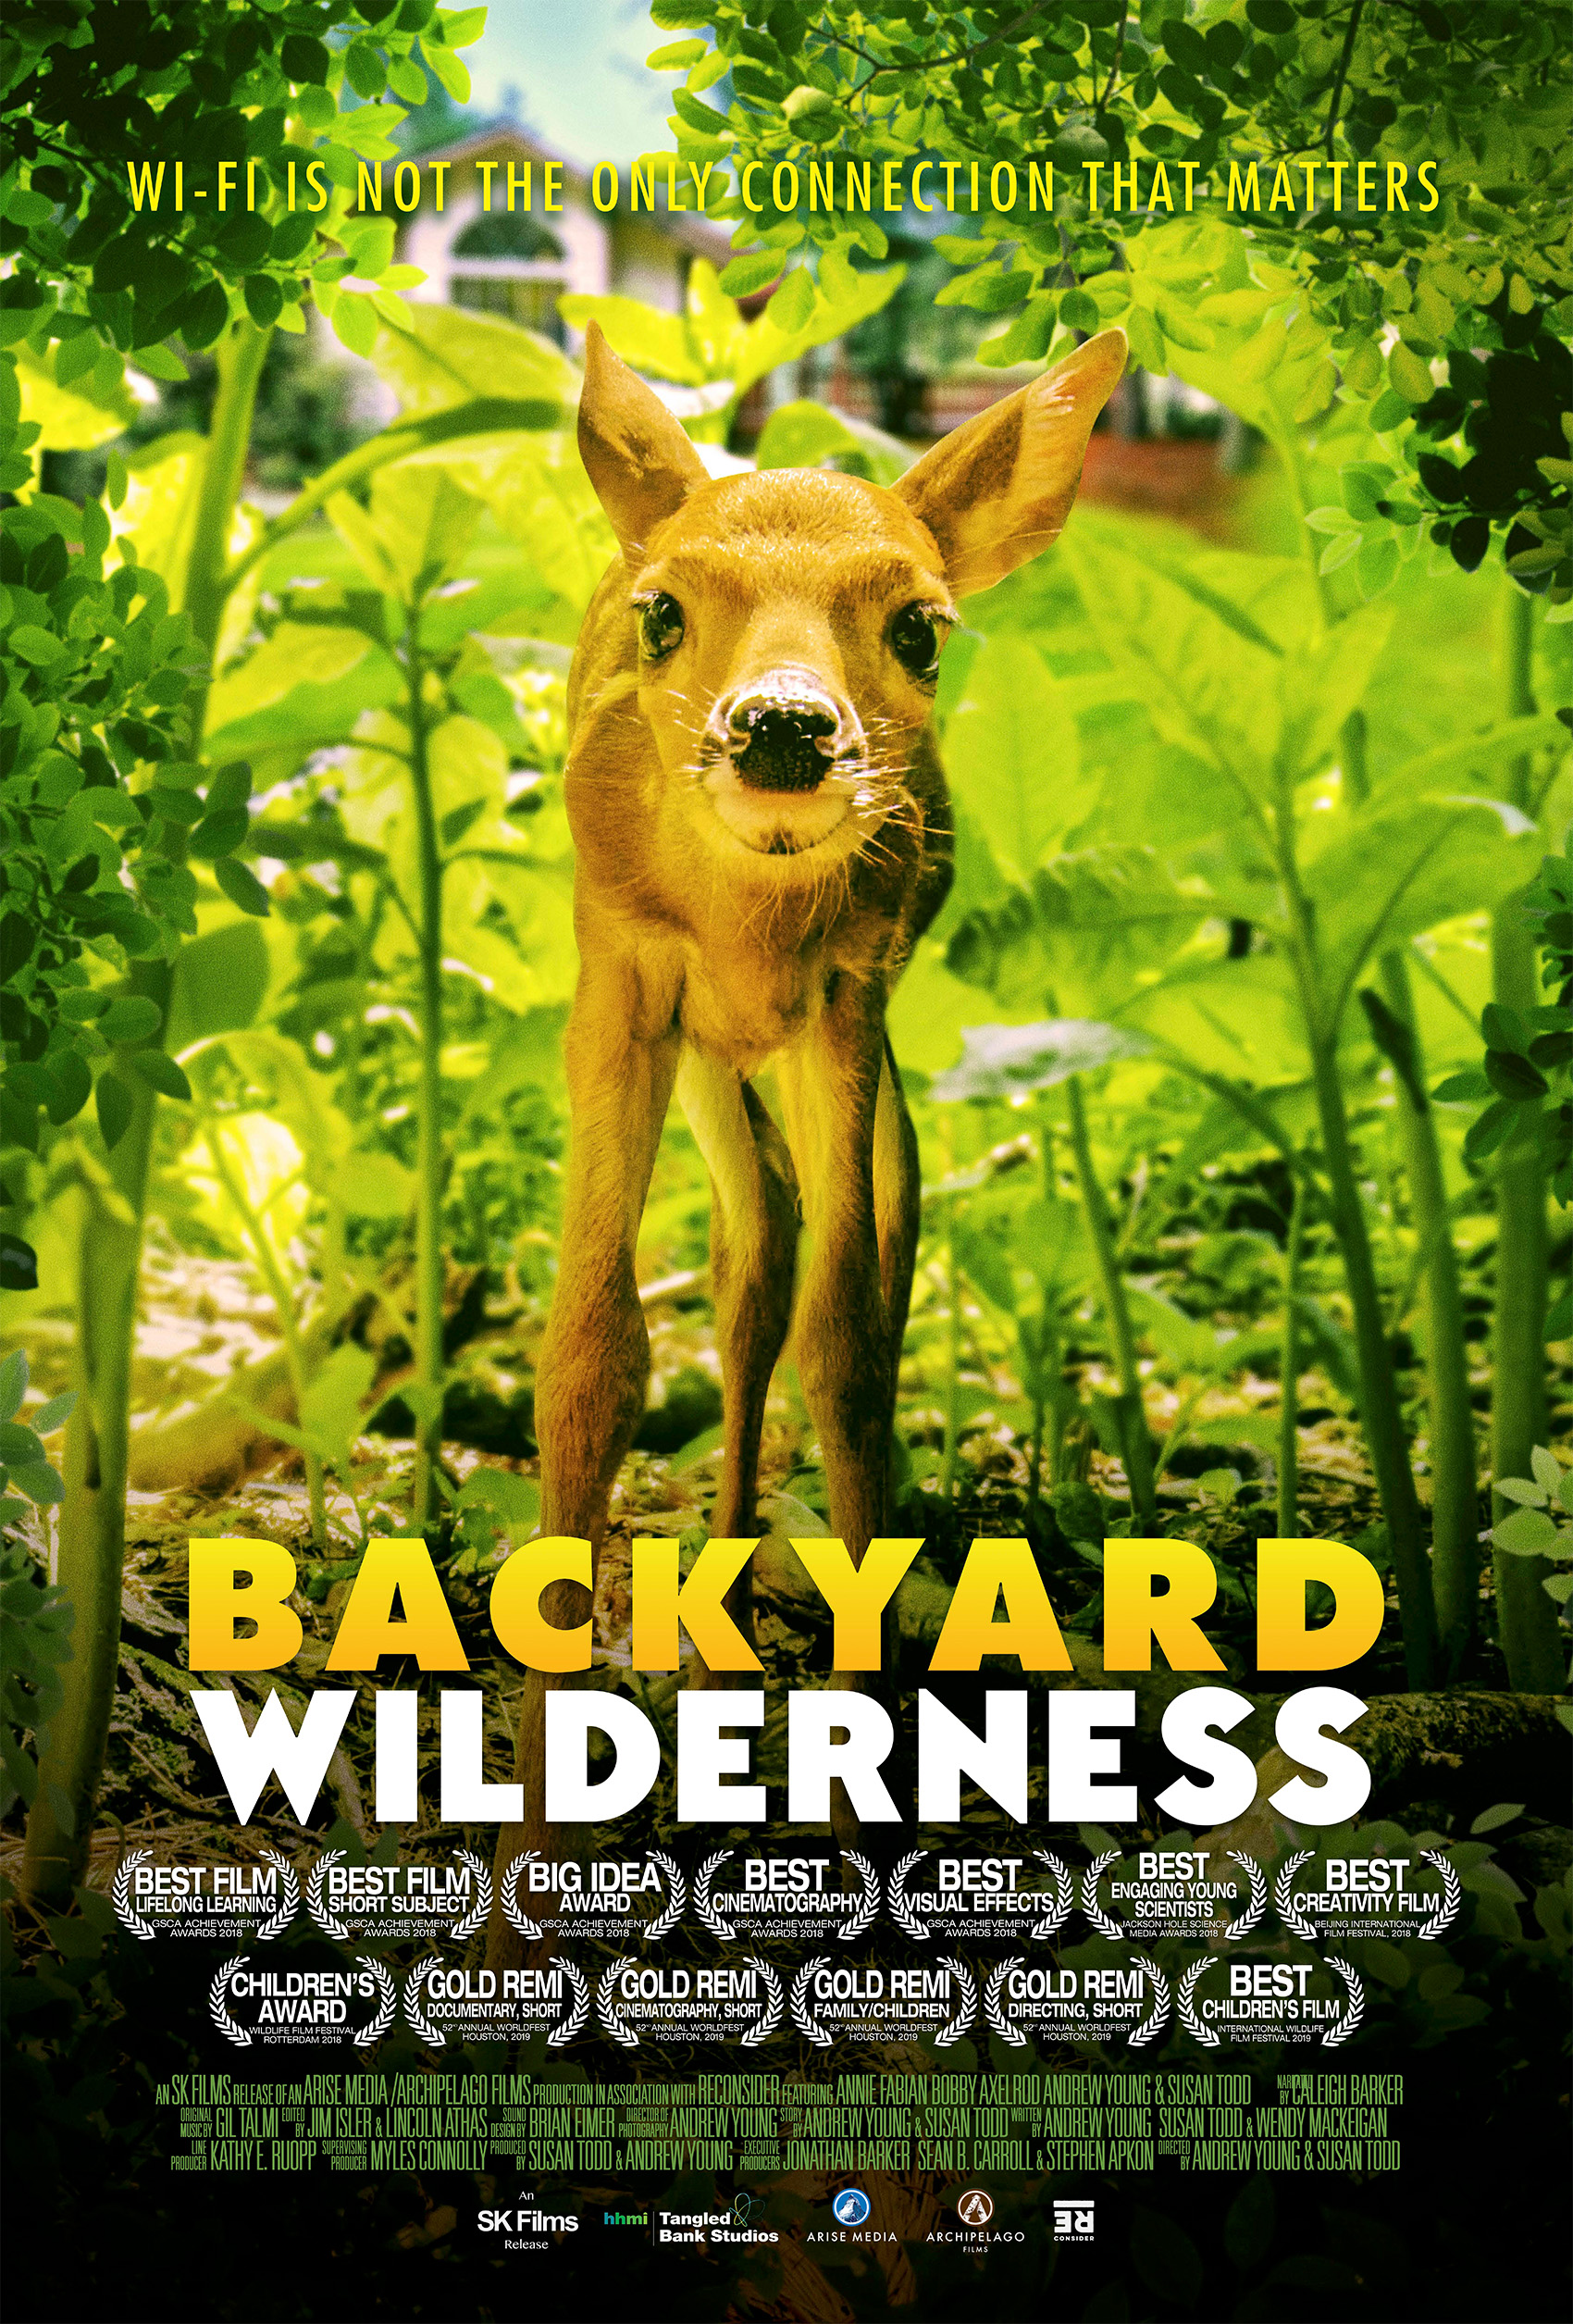 Wilderness About the Film